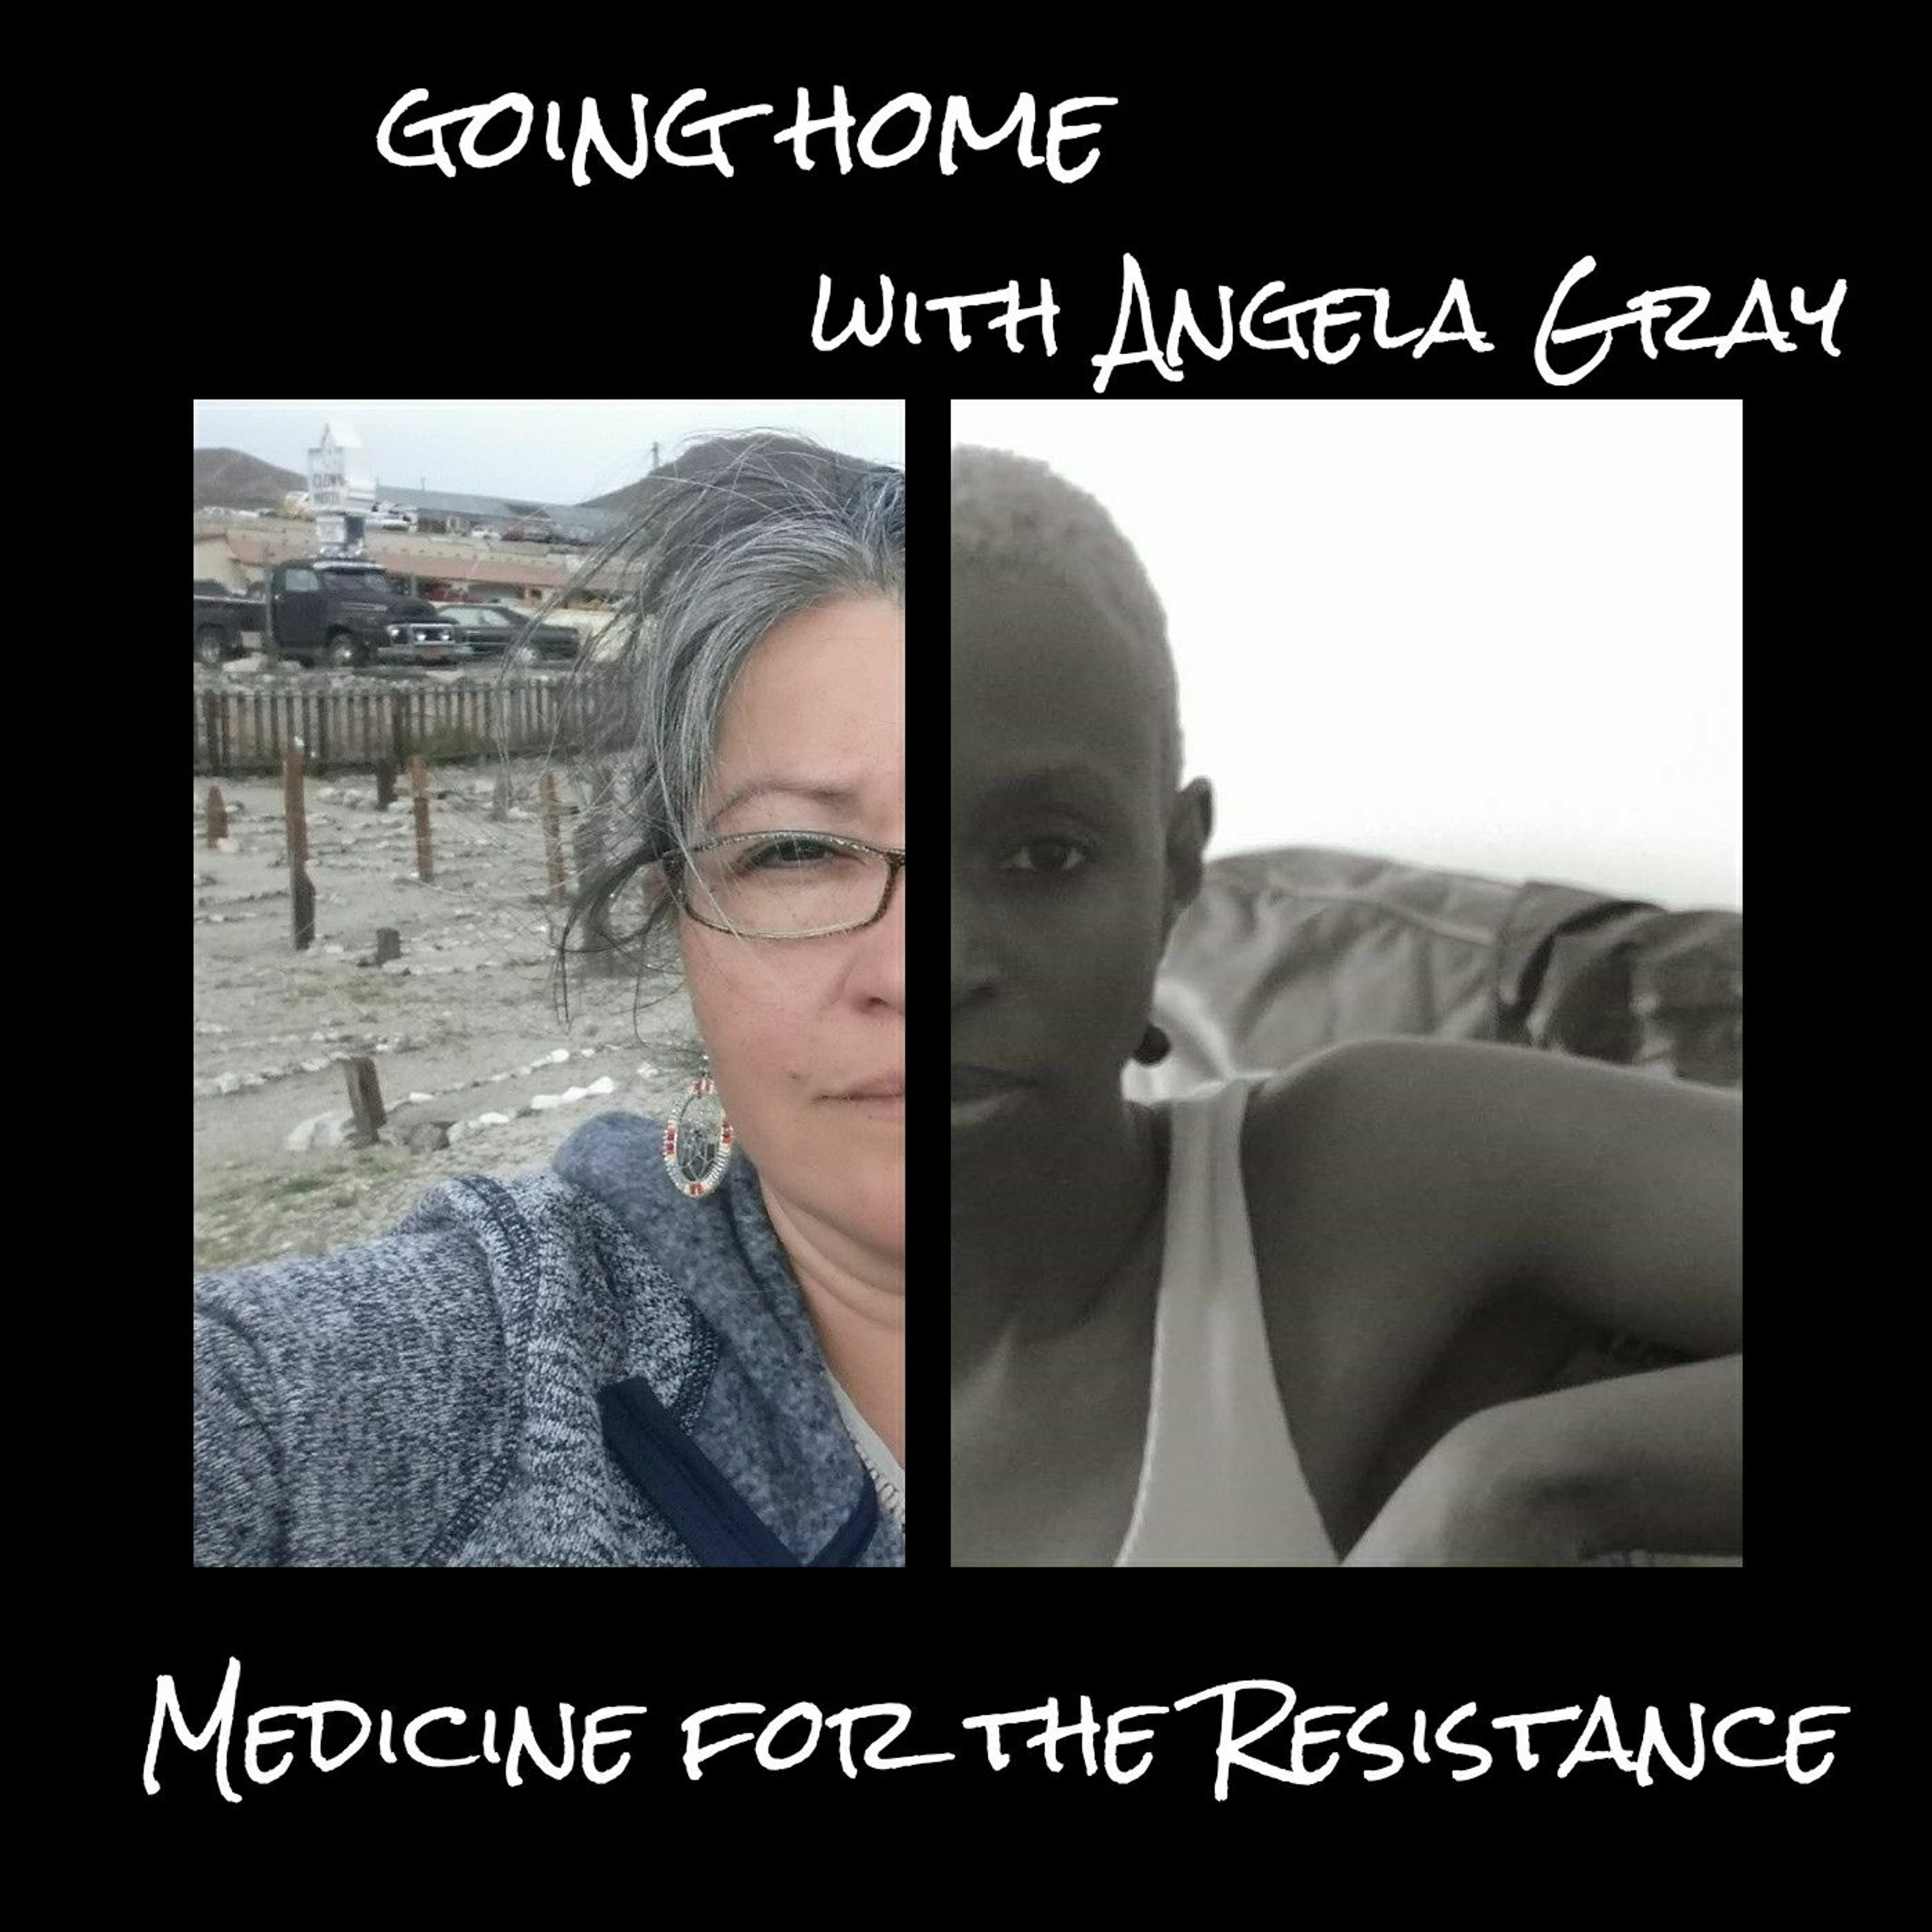 Going Home, with Angela Gray